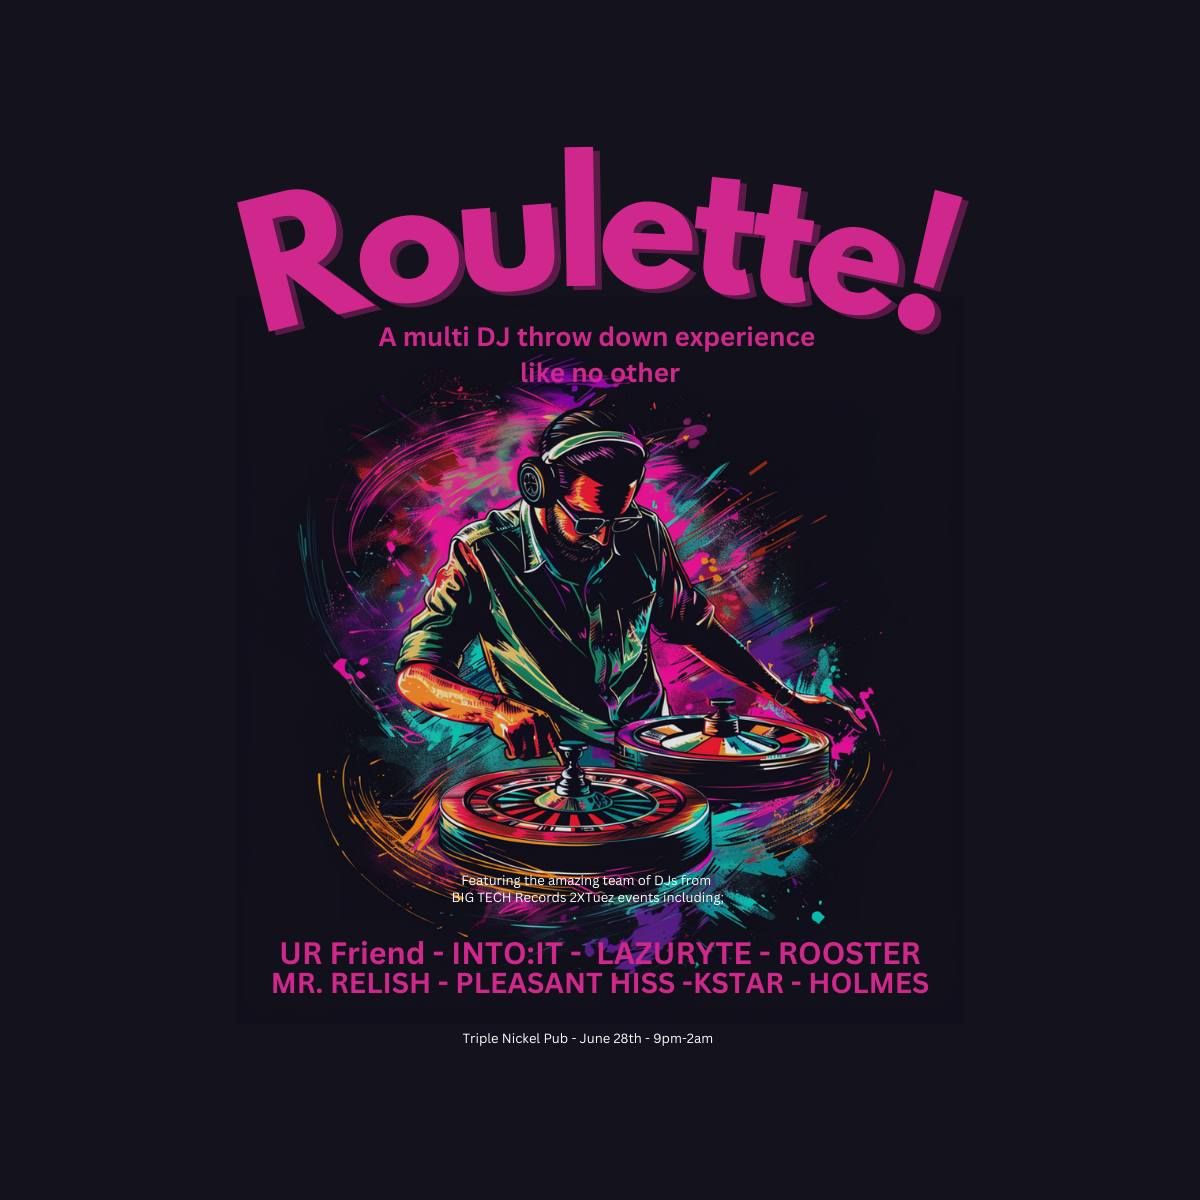 Roulette! A Multi DJ Throw Down Experience Like No Other